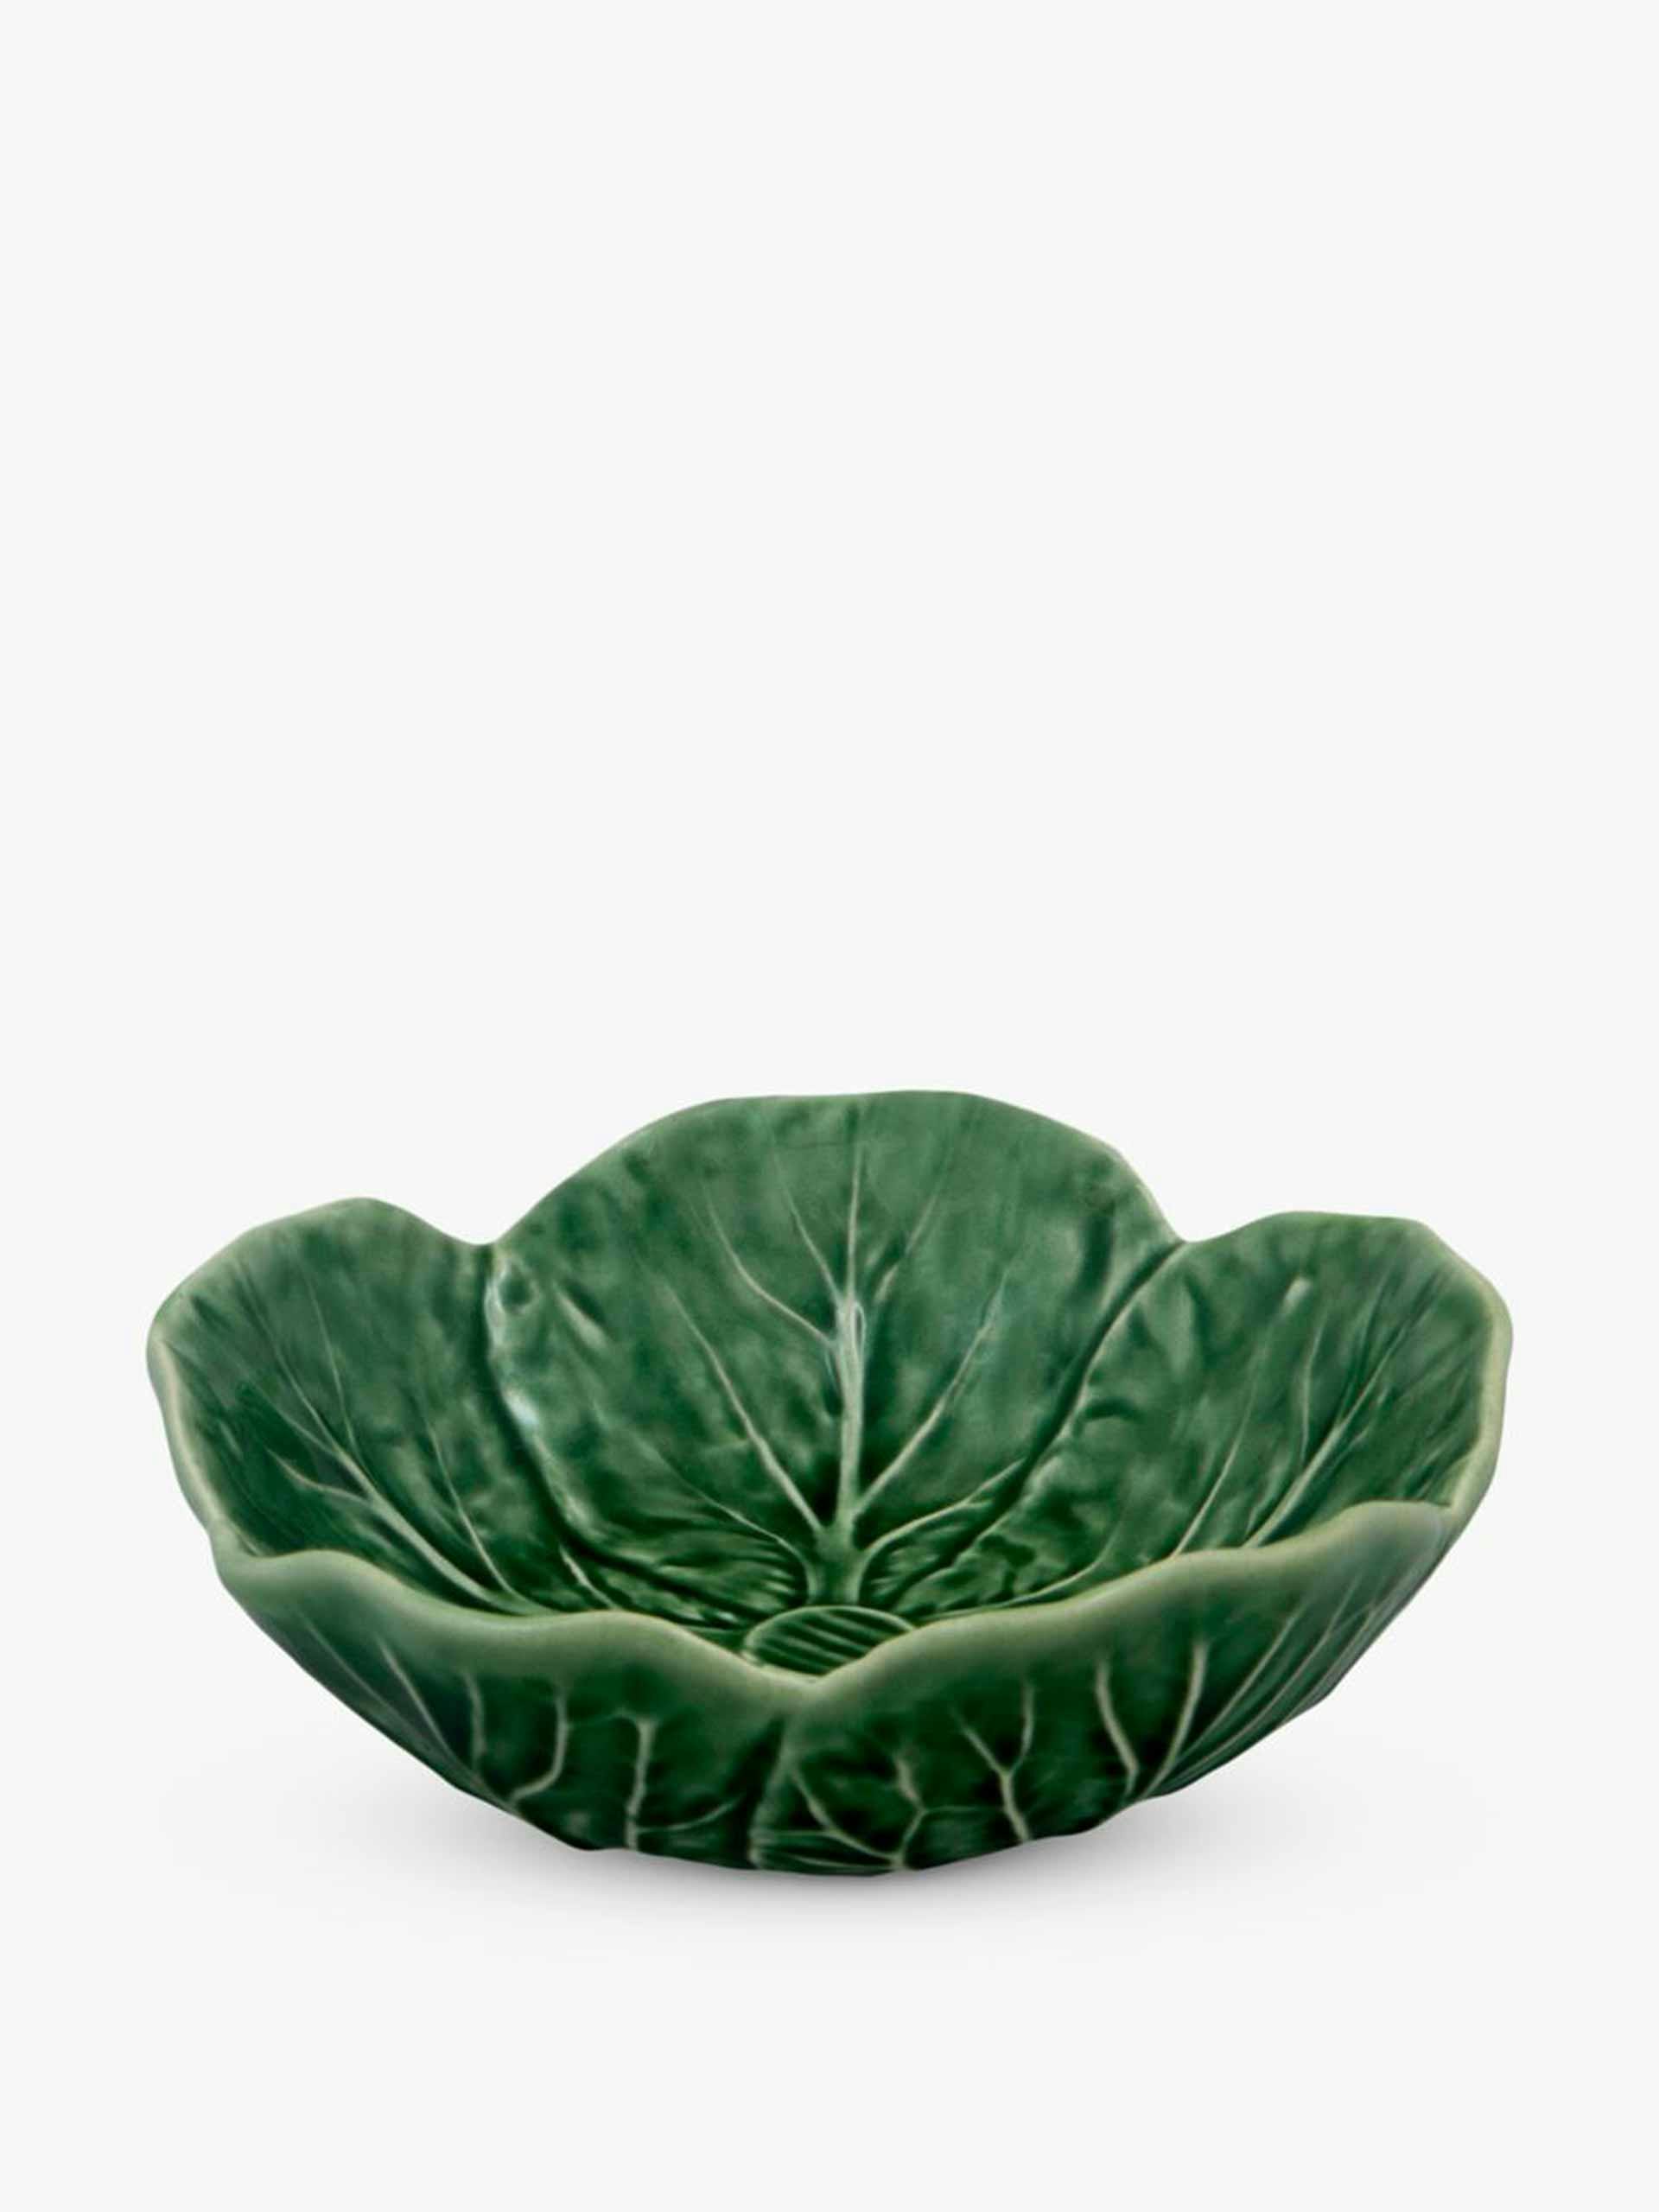 Cabbage earthenware serving bowl